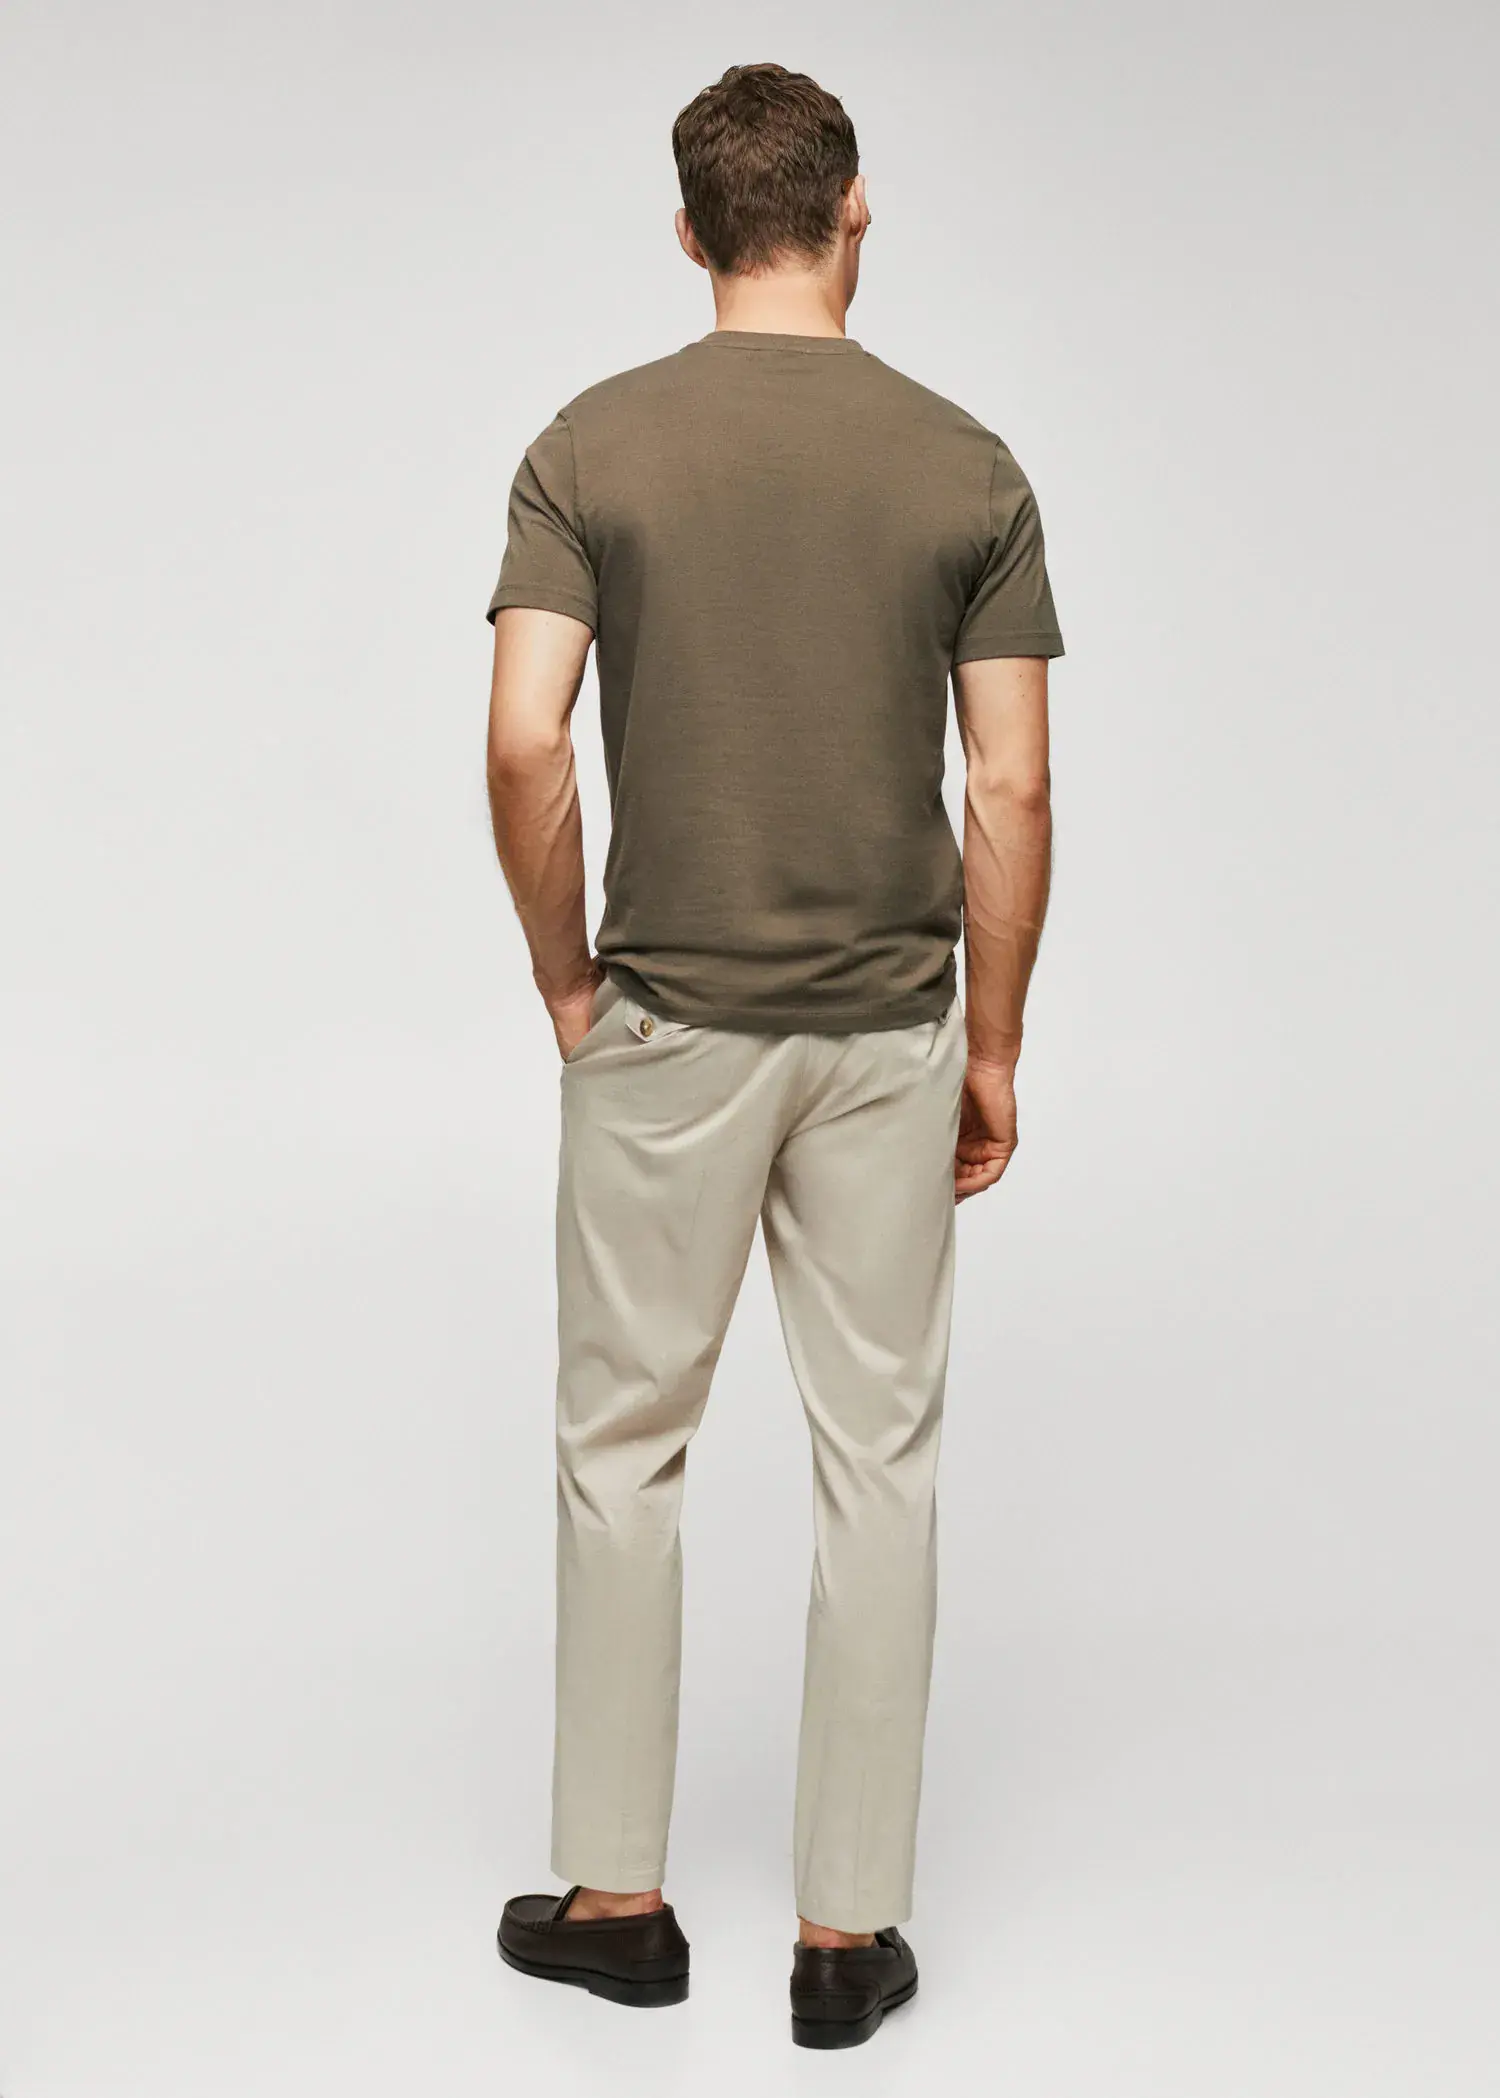 Mango Stretch cotton T-shirt. a man standing with his hands in his pockets. 